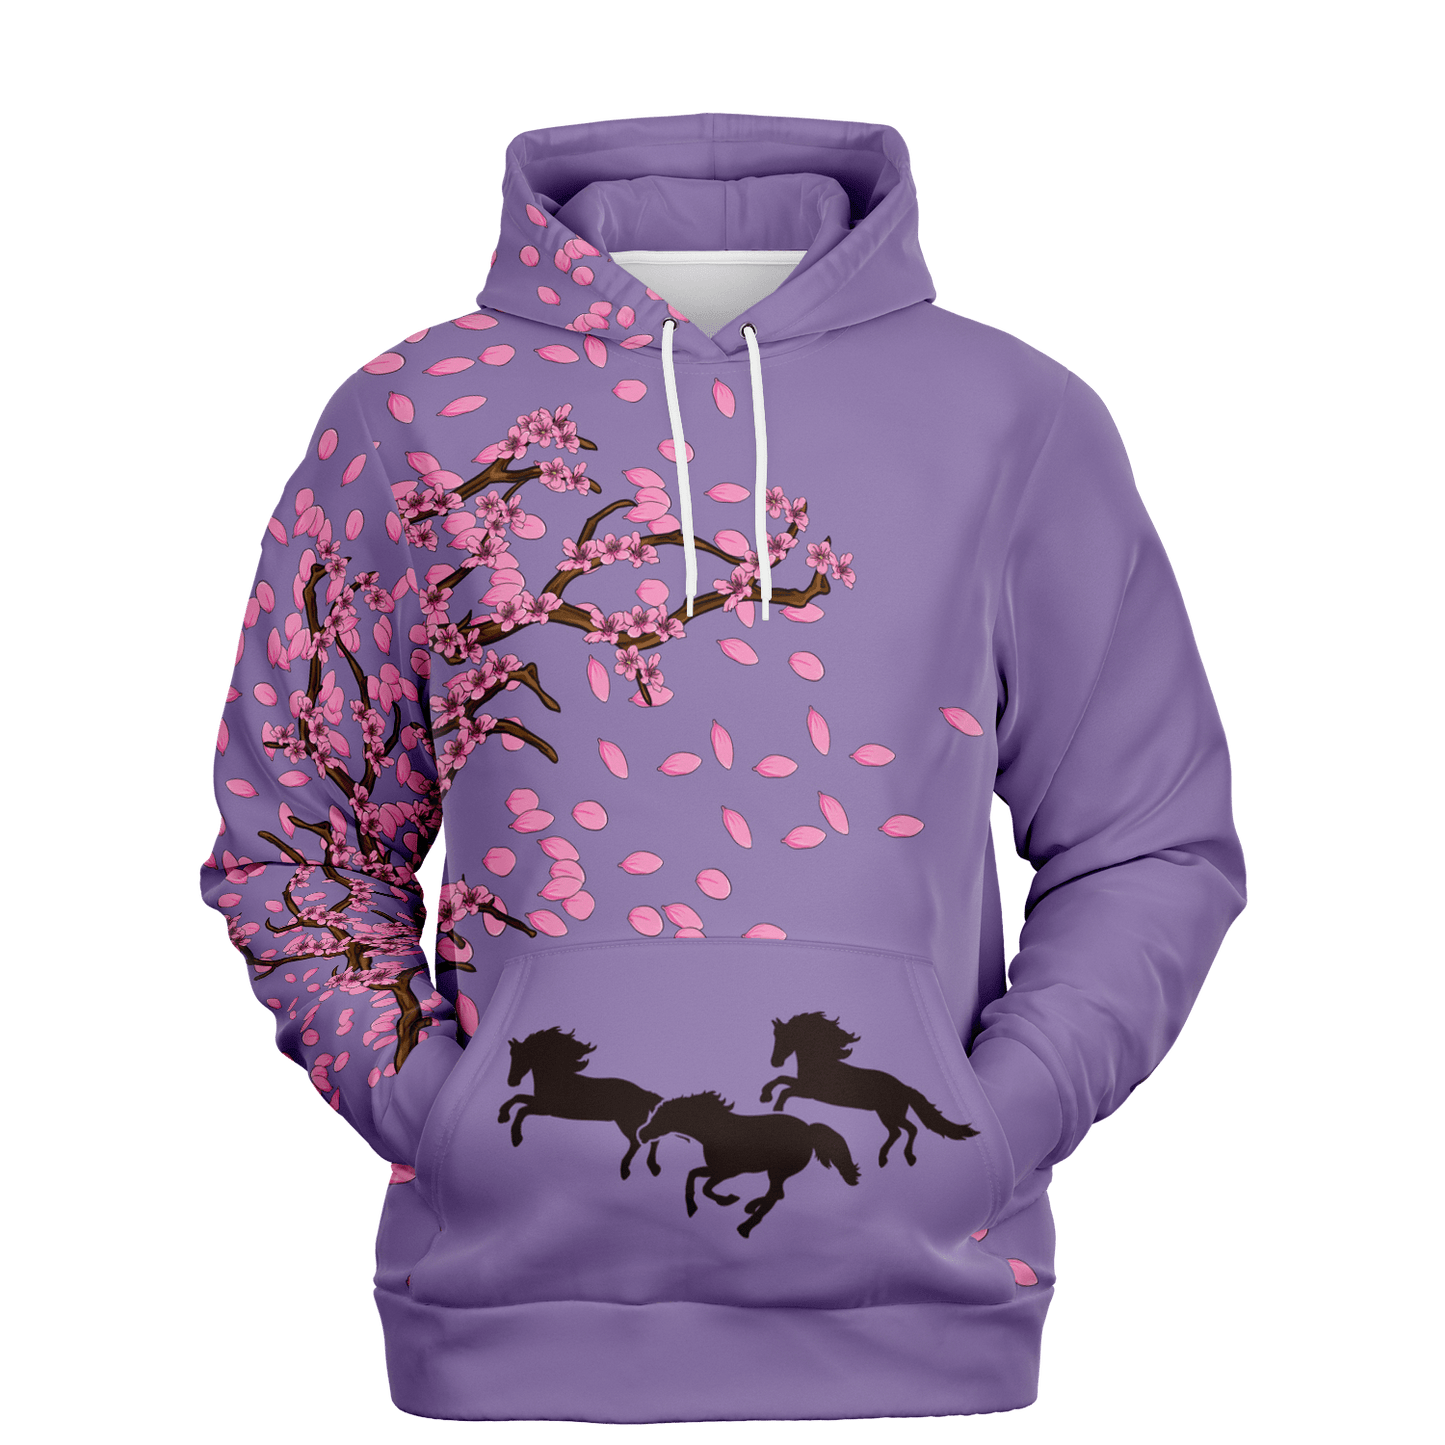 Cherry Blossom tree on a Purple background with 3 black Horses on the front pocket of the  Hoodie